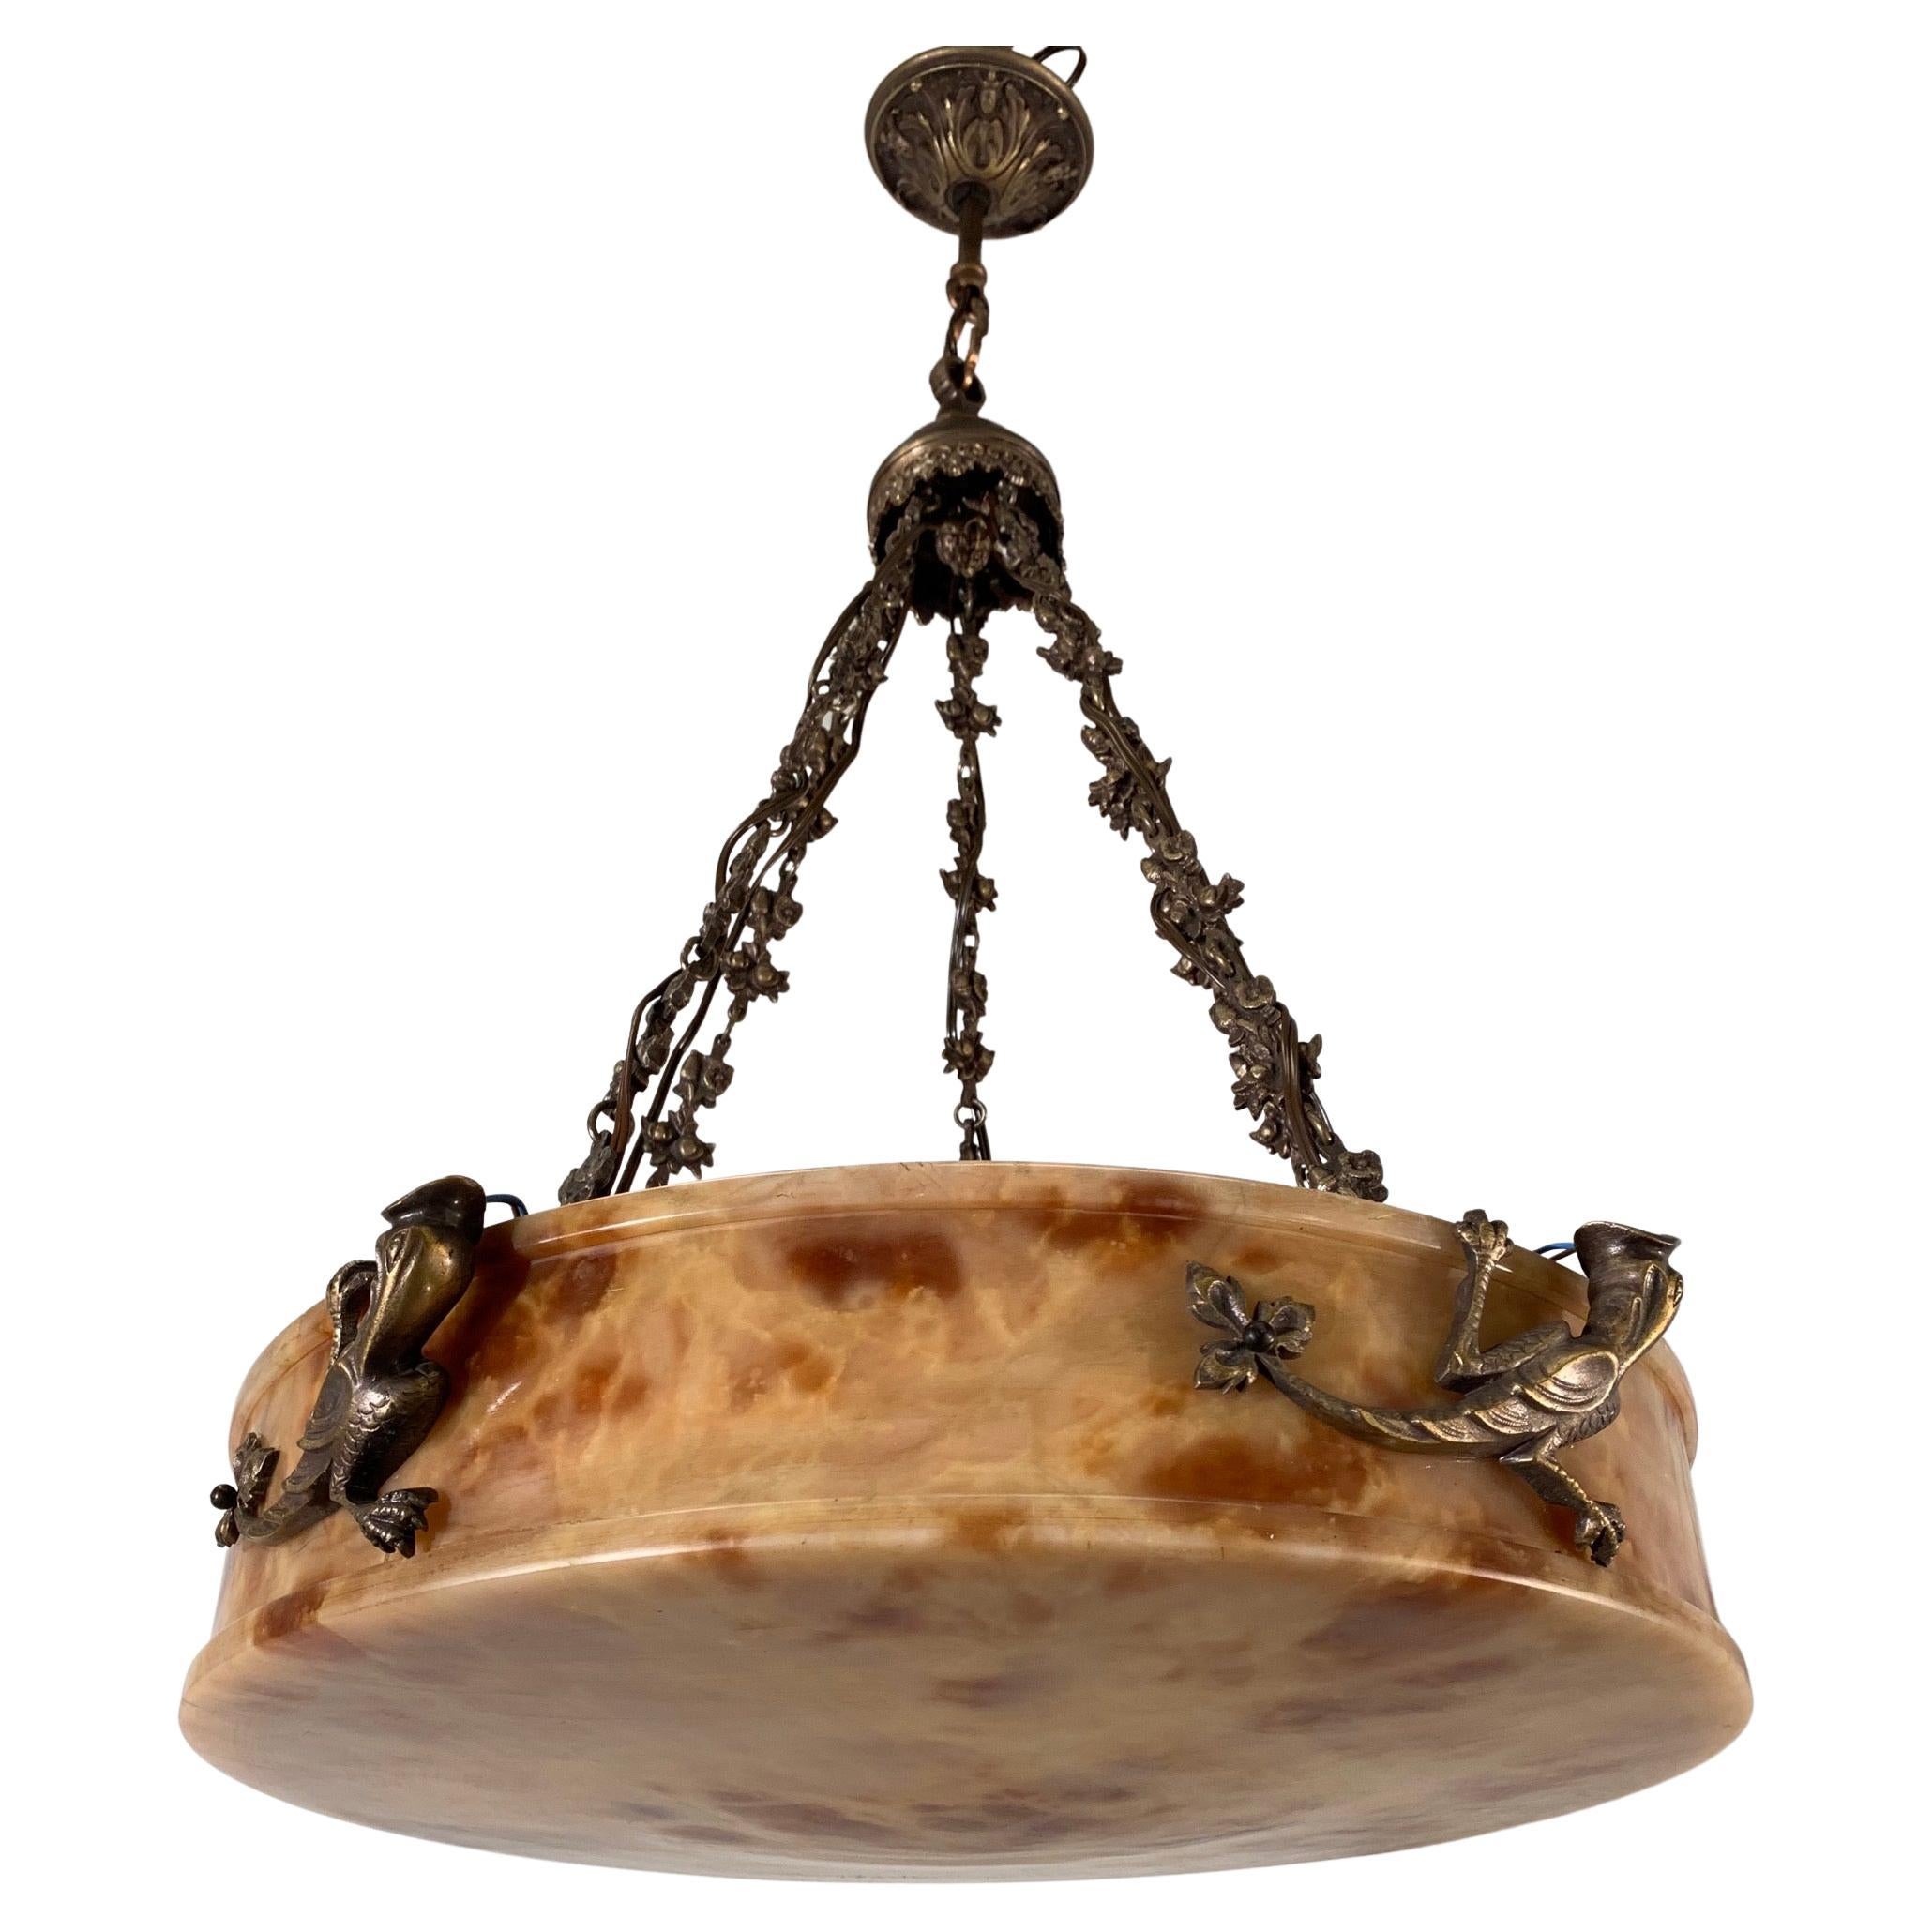 Beautiful design and wonderful light creating, mineral stone fixture.

This marvelous, early 20th century alabaster and bronze work of lighting art is another one of our recent and great finds. This rare, possibly unique and definitely large Art